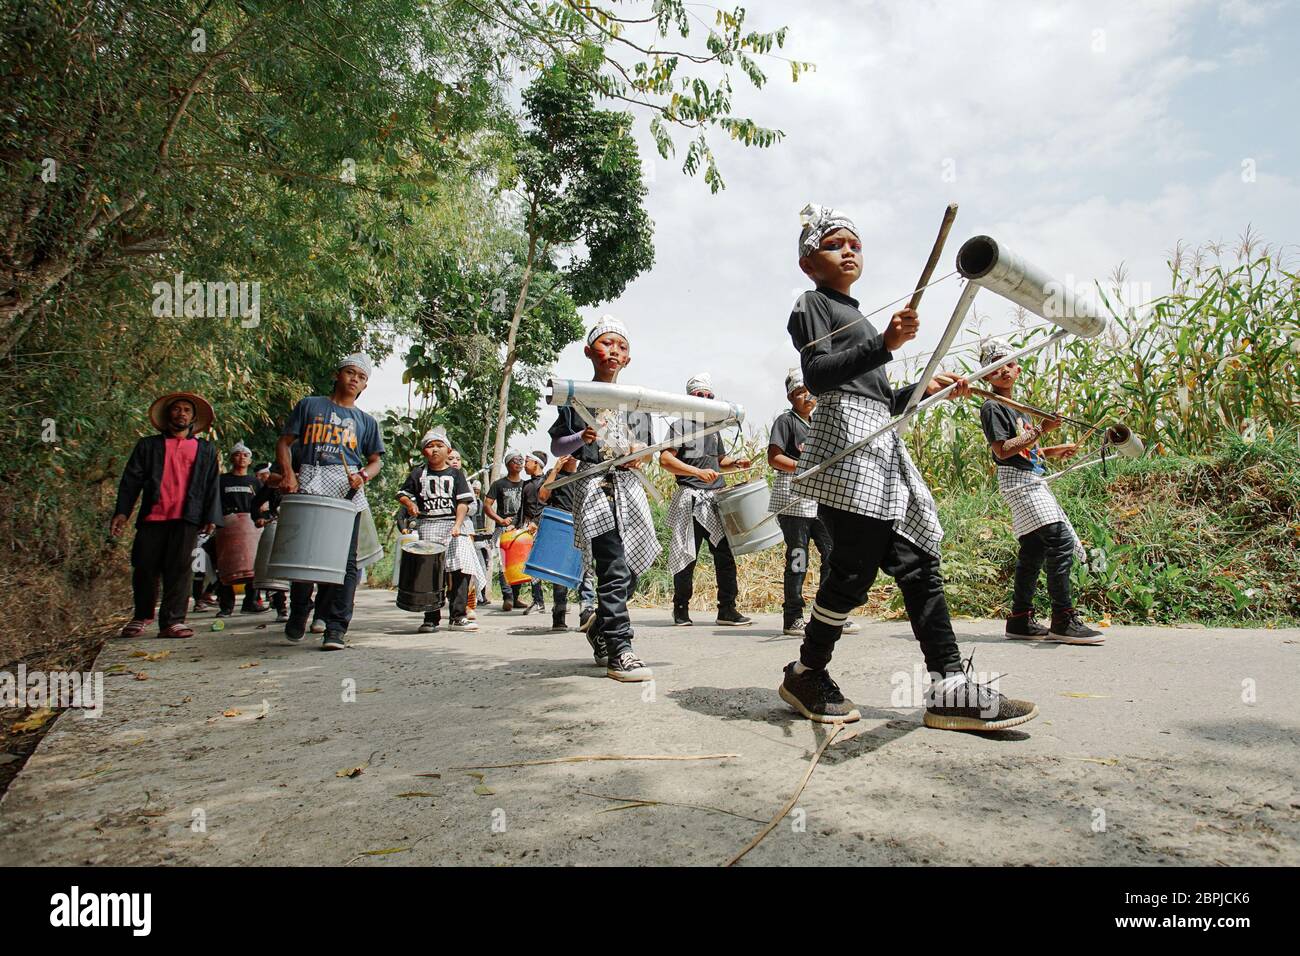 Kids performing Drumblek, contemporary music instruments from unused tools at Badran village, Central Java, Indonesia Stock Photo